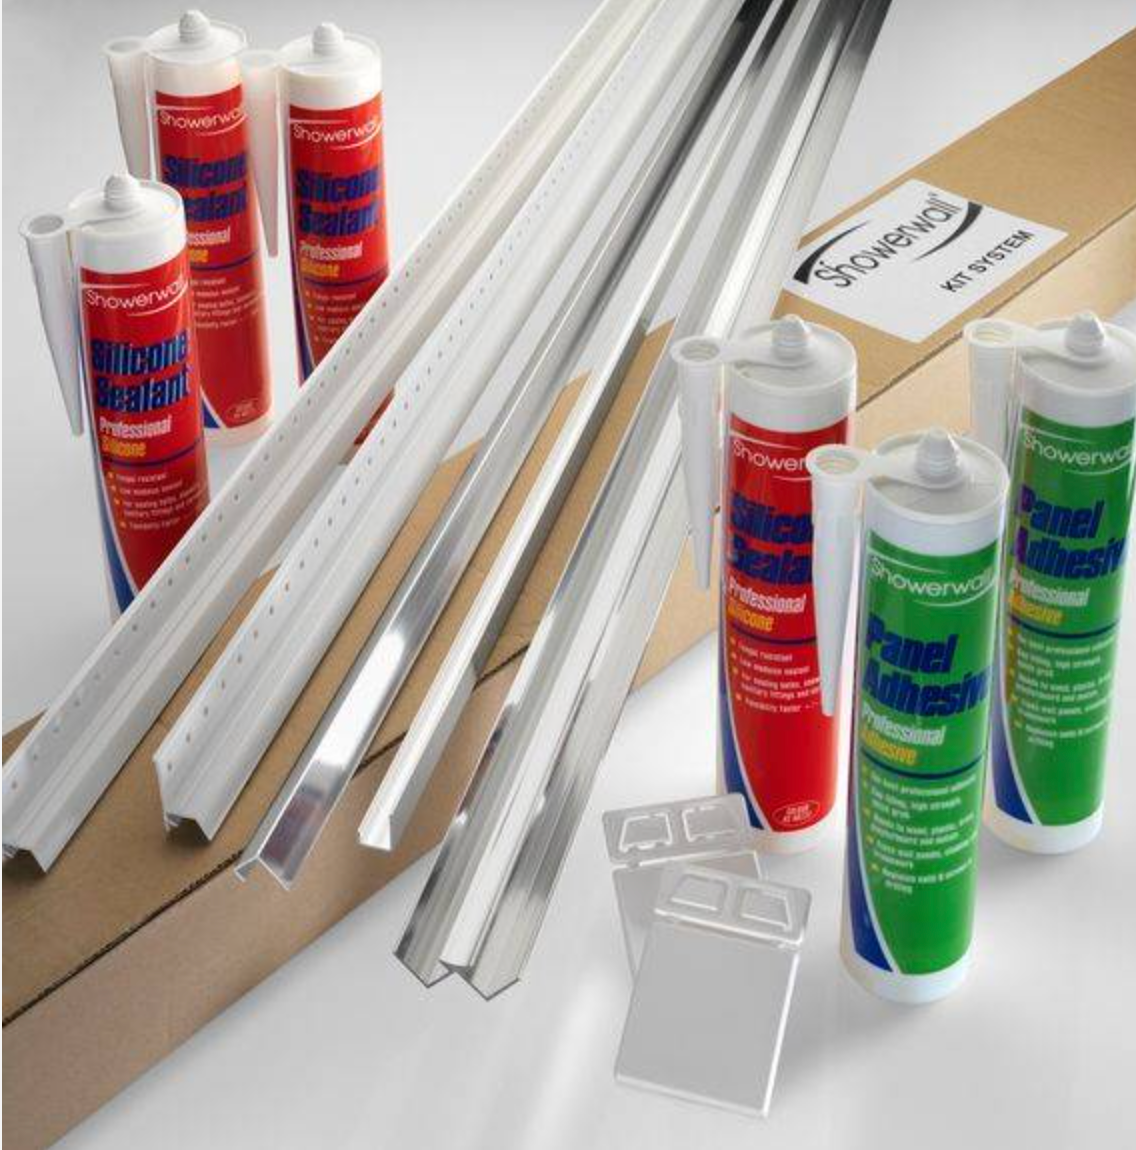 Showerwall Laminate Installation Kit - Bright Silver trim with clear or White sealant